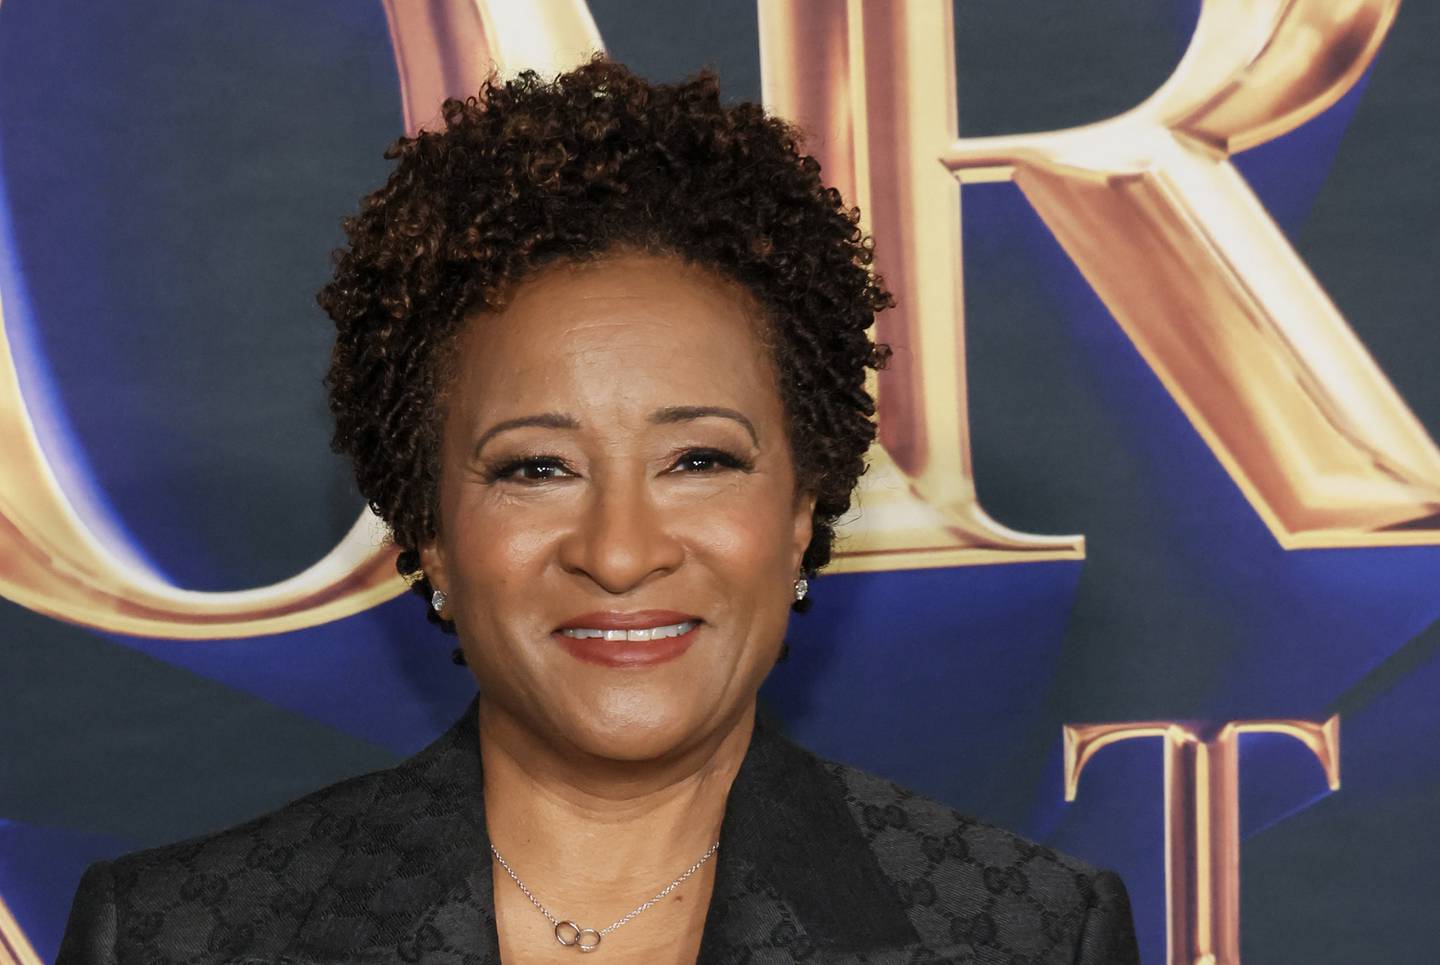 Wanda Sykes attends the Los Angeles premiere for Hulu's "History of the World, Part II" at Hollywood Legion Theater on February 27, 2023 in Los Angeles, California.